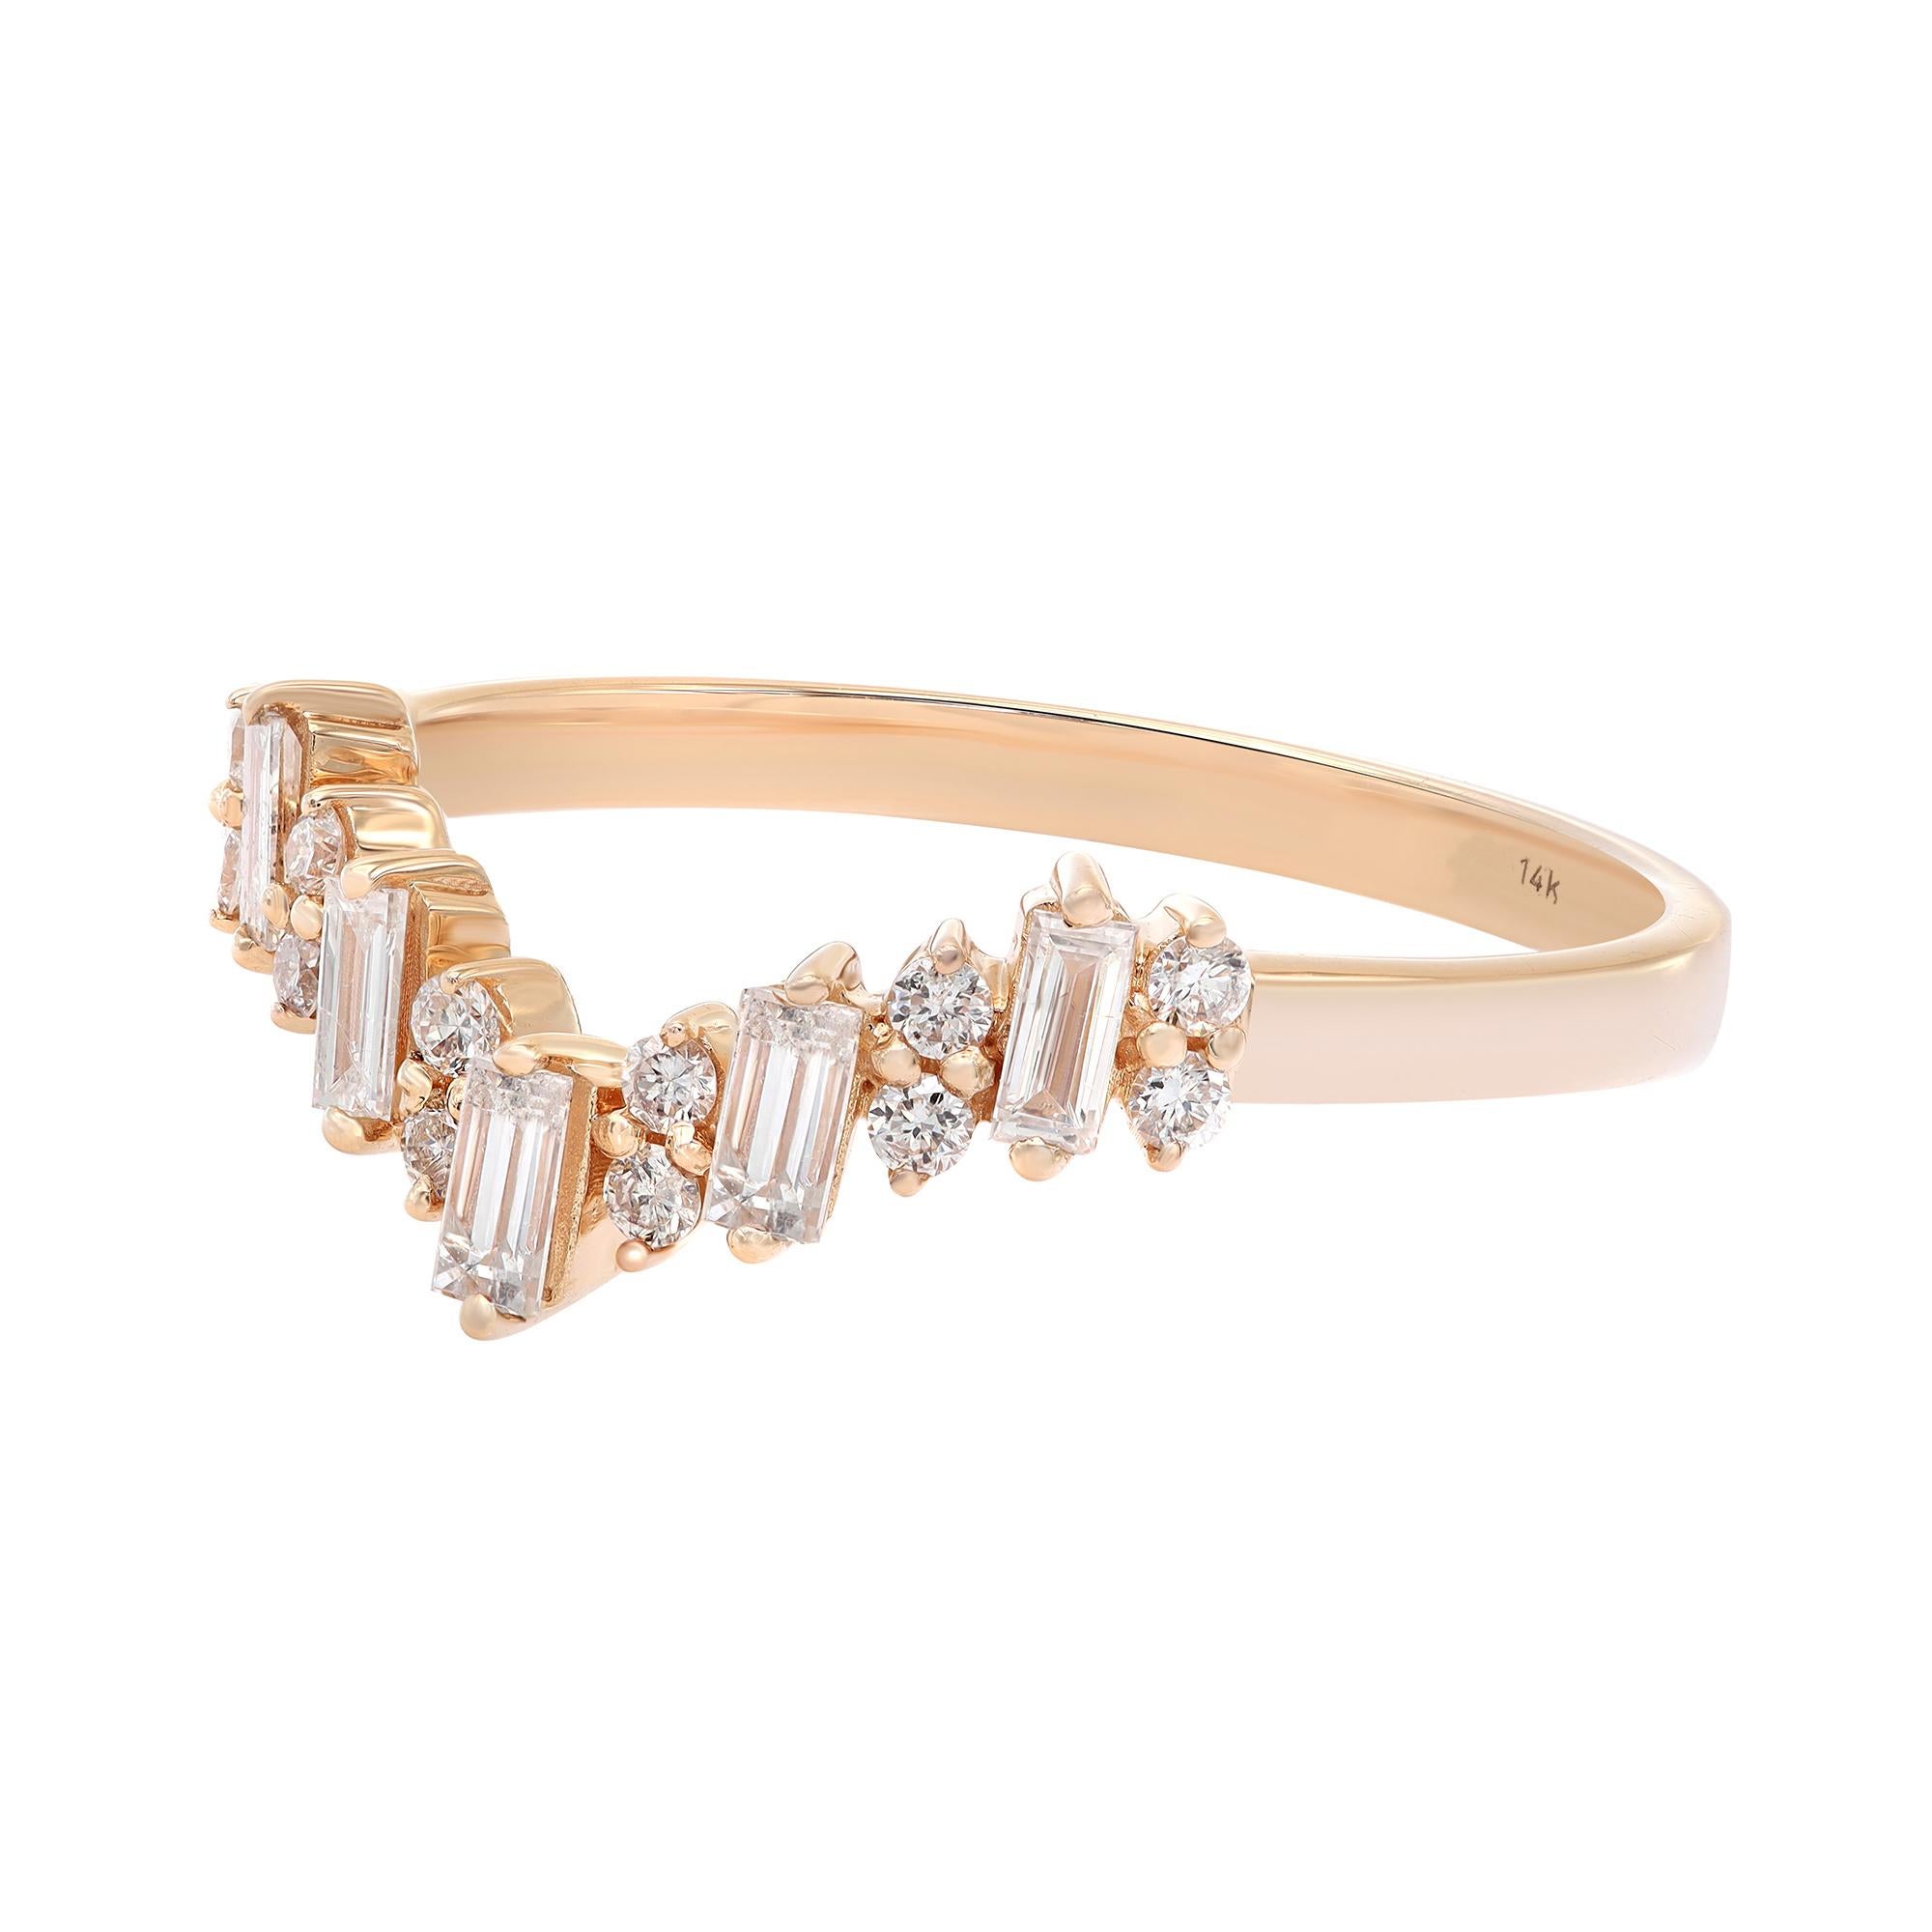 This beautiful diamond V shape ring is a perfect fit for any occasion. Crafted in 14K rose gold, it features 5 pieces of baguette cut and 12 pieces of round cut diamonds in prong setting. The total diamond weight is 0.29cts. Diamond color G-H and